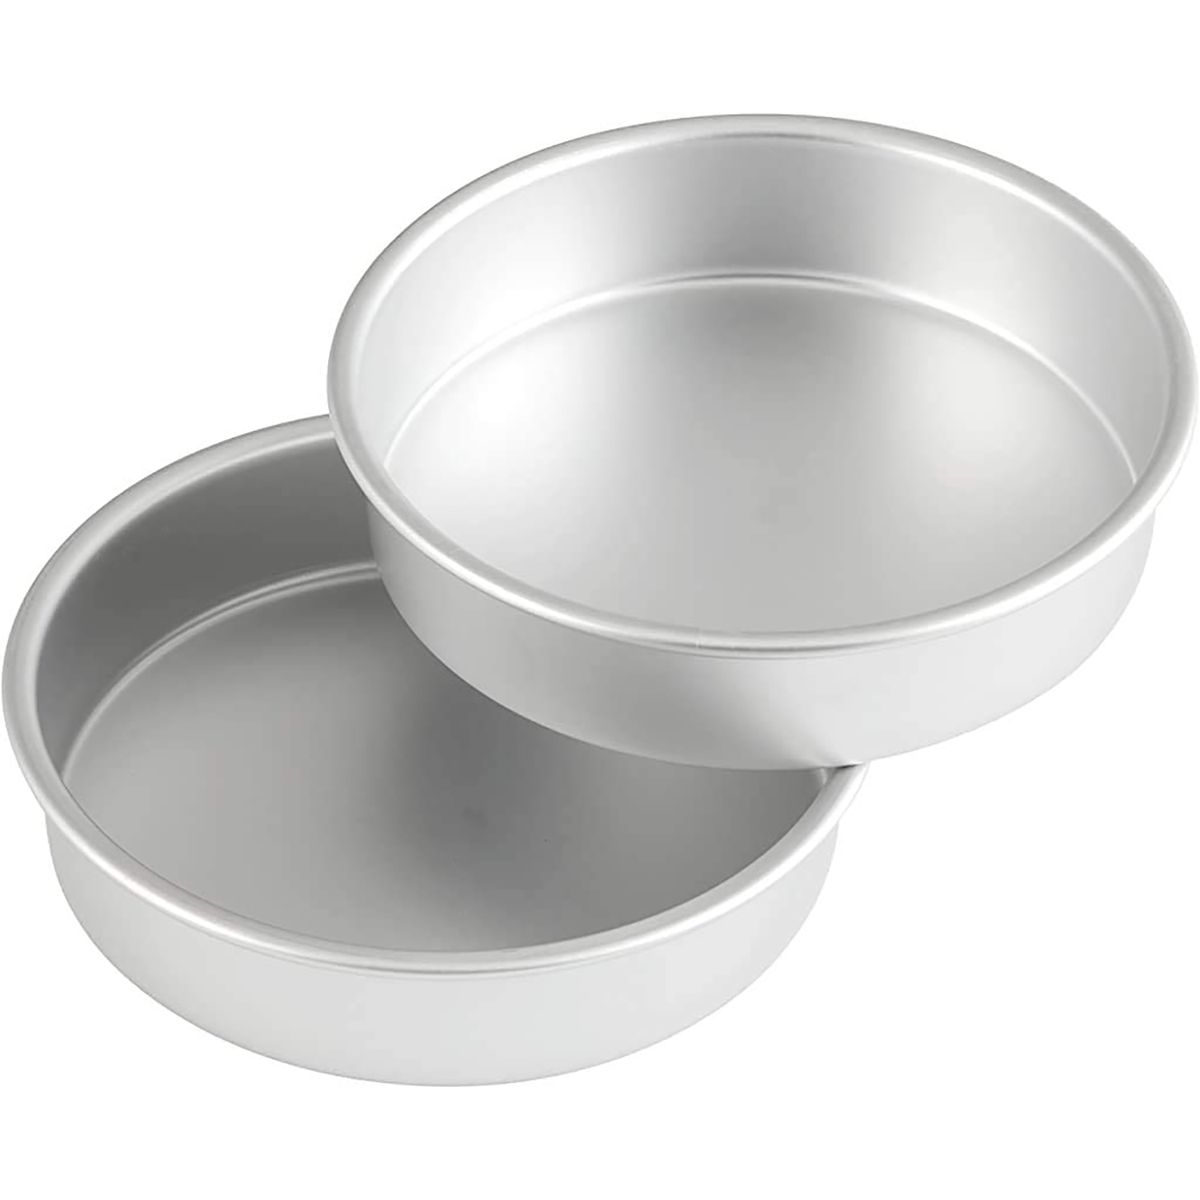 The 10 Best Cake Pans of 2021, According to Amazon Reviews